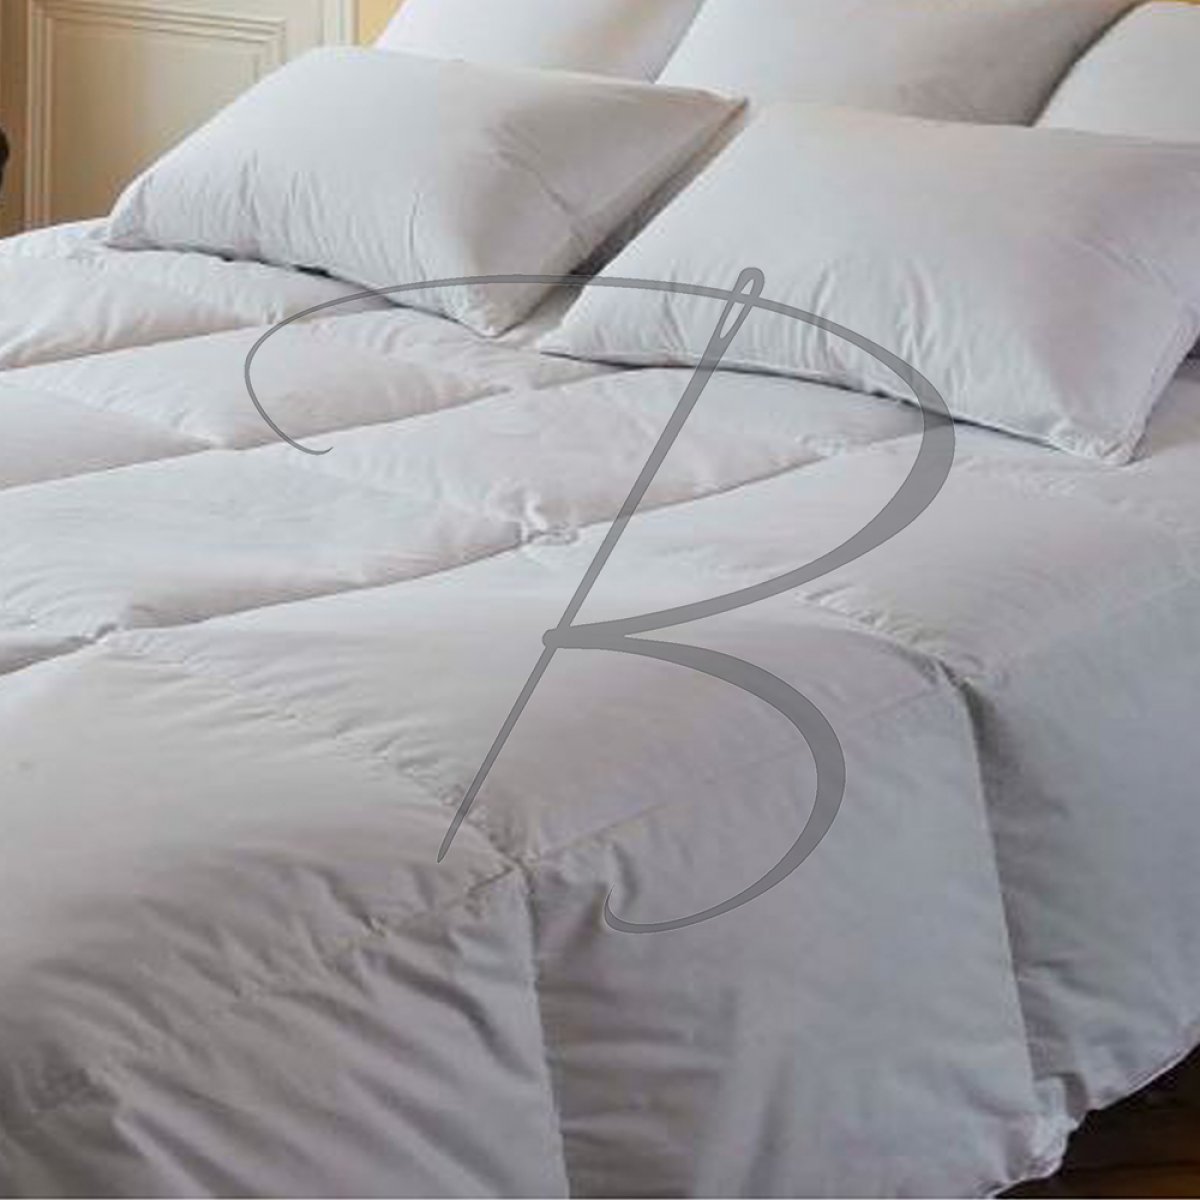 Synthetic comforter EVEREST - 400g/m² - 240 x 220